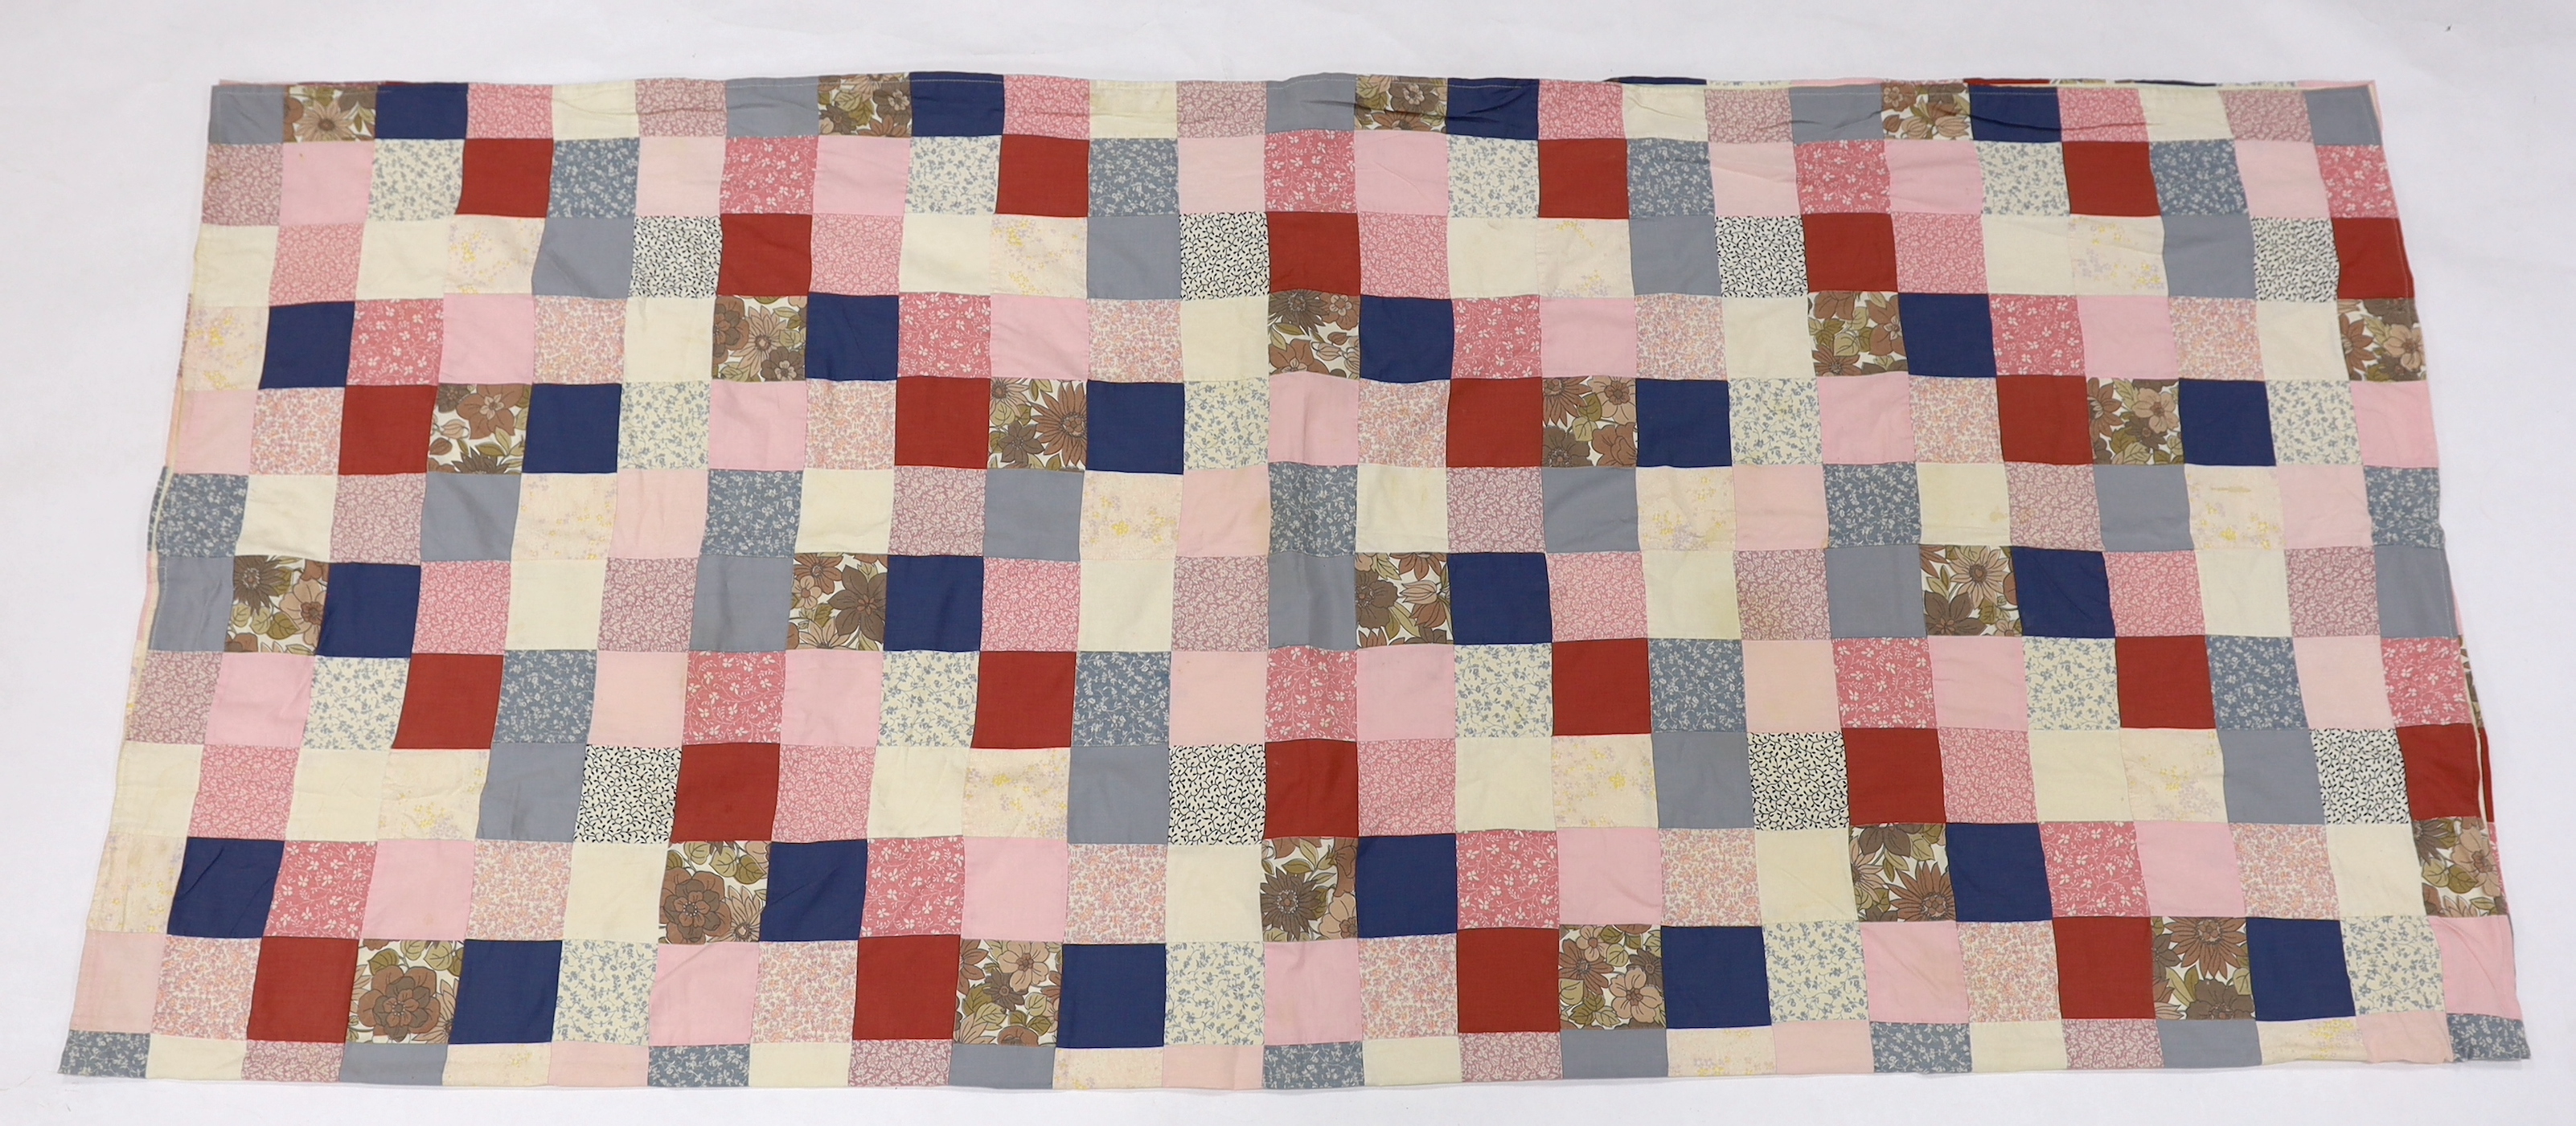 A patchwork bedcover, designed with Laura Ashley, 20th century fabrics, 215cm x 215cm sq.